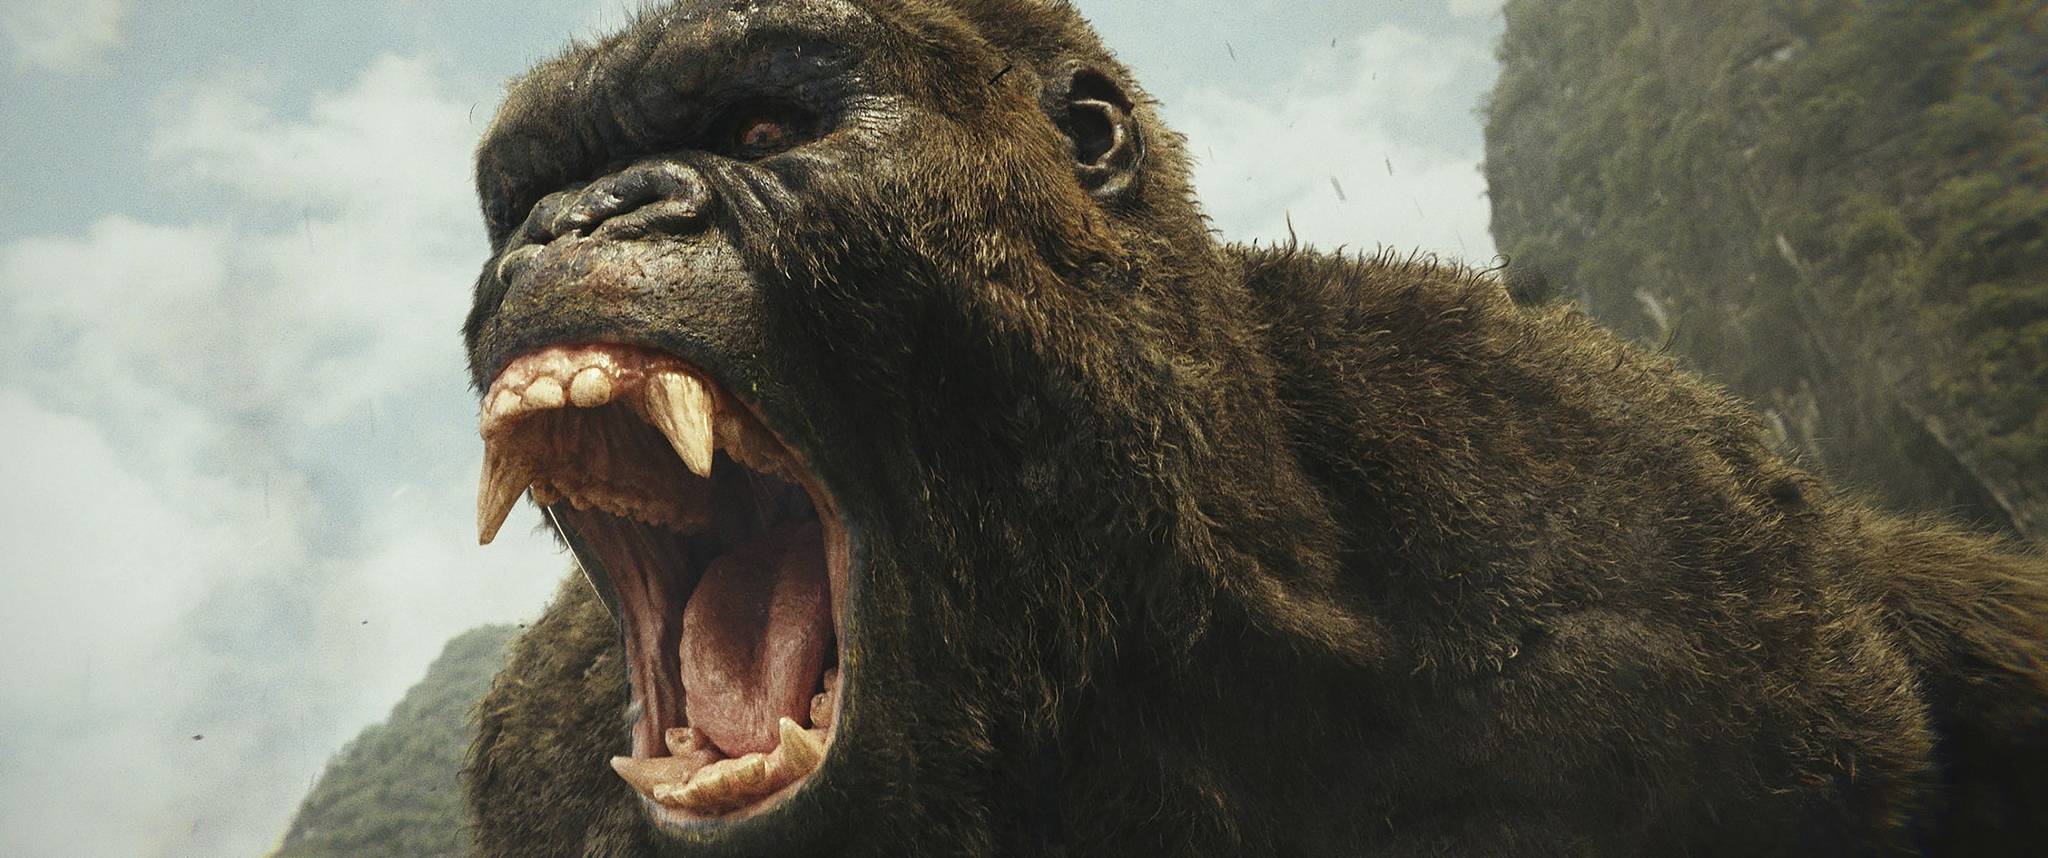 This image released by Warner Bros. Pictures shows a scene from, “Kong: Skull Island.” (Warner Bros. Pictures via AP)